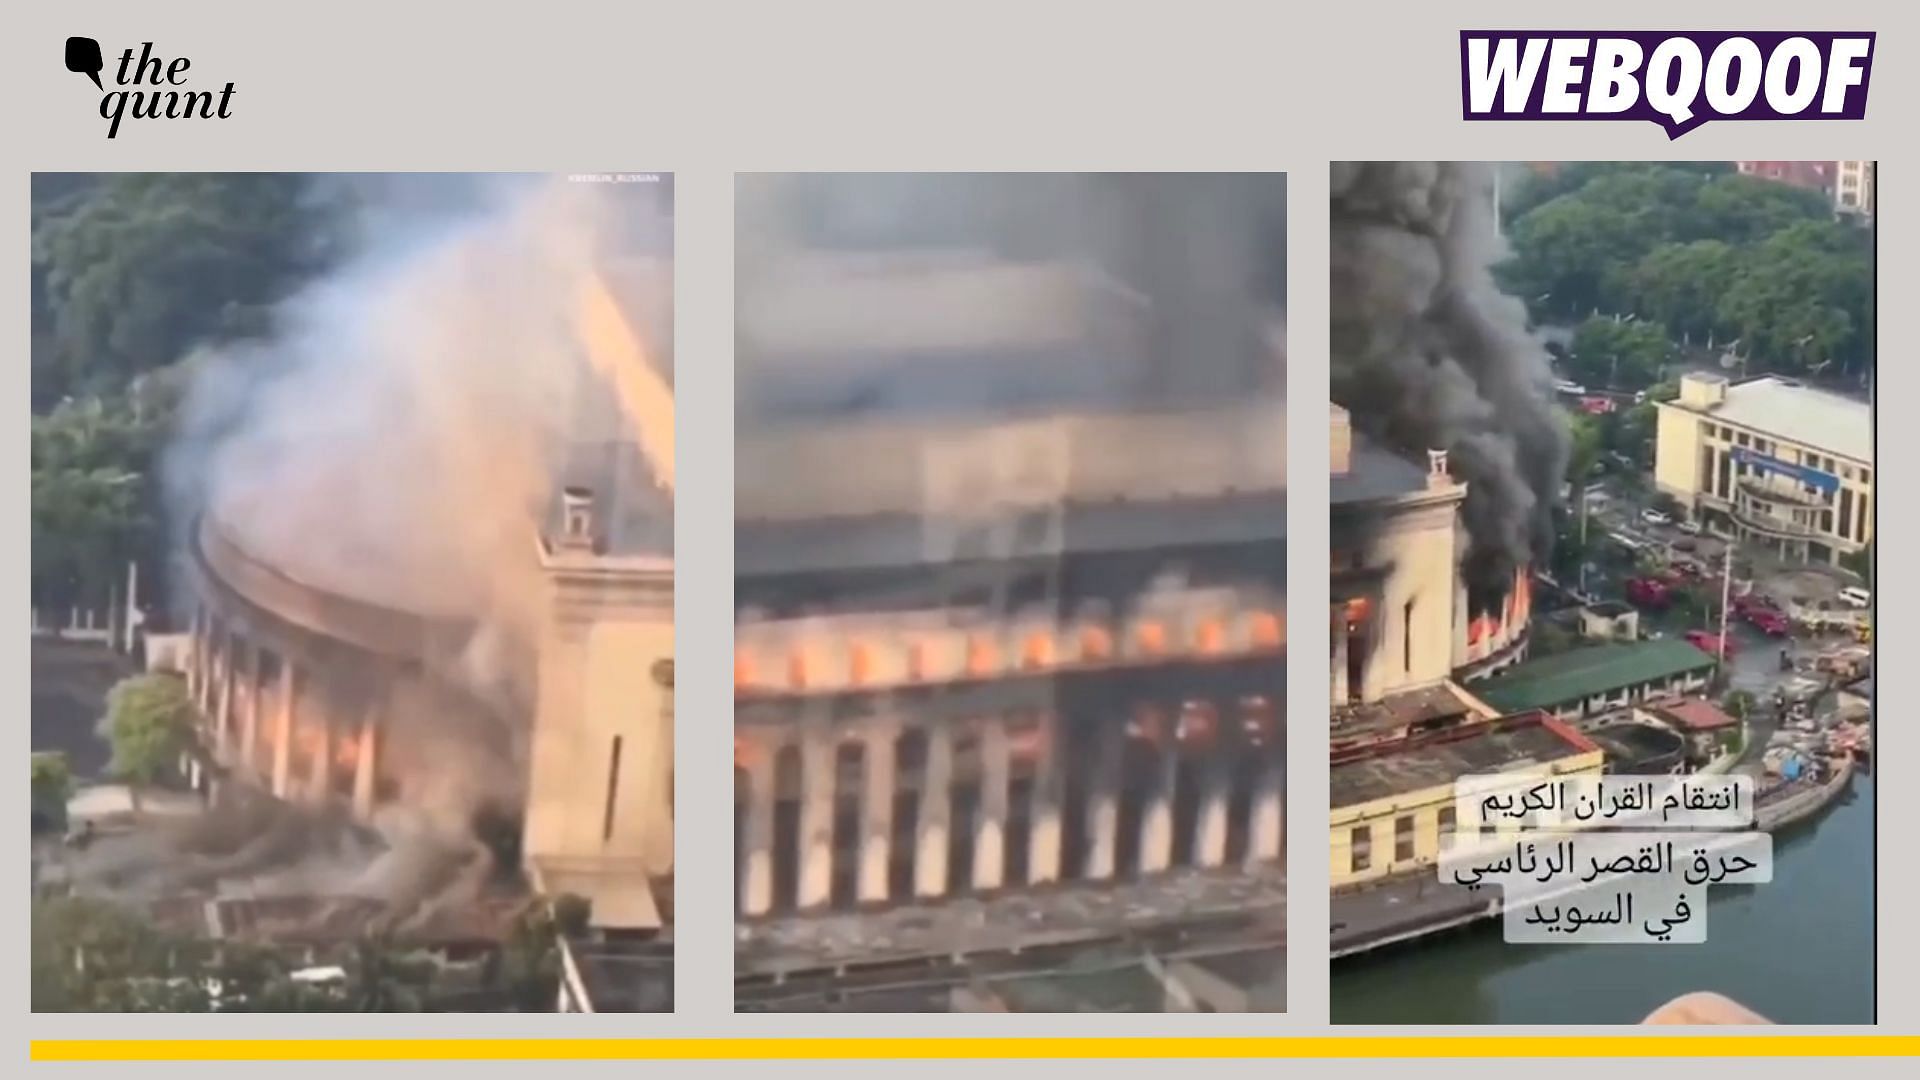 <div class="paragraphs"><p>Fact-check:&nbsp;An old video from Philippine showing a historic post office building set ablaze is being passed off as a recent video from France and Sweden.</p></div>